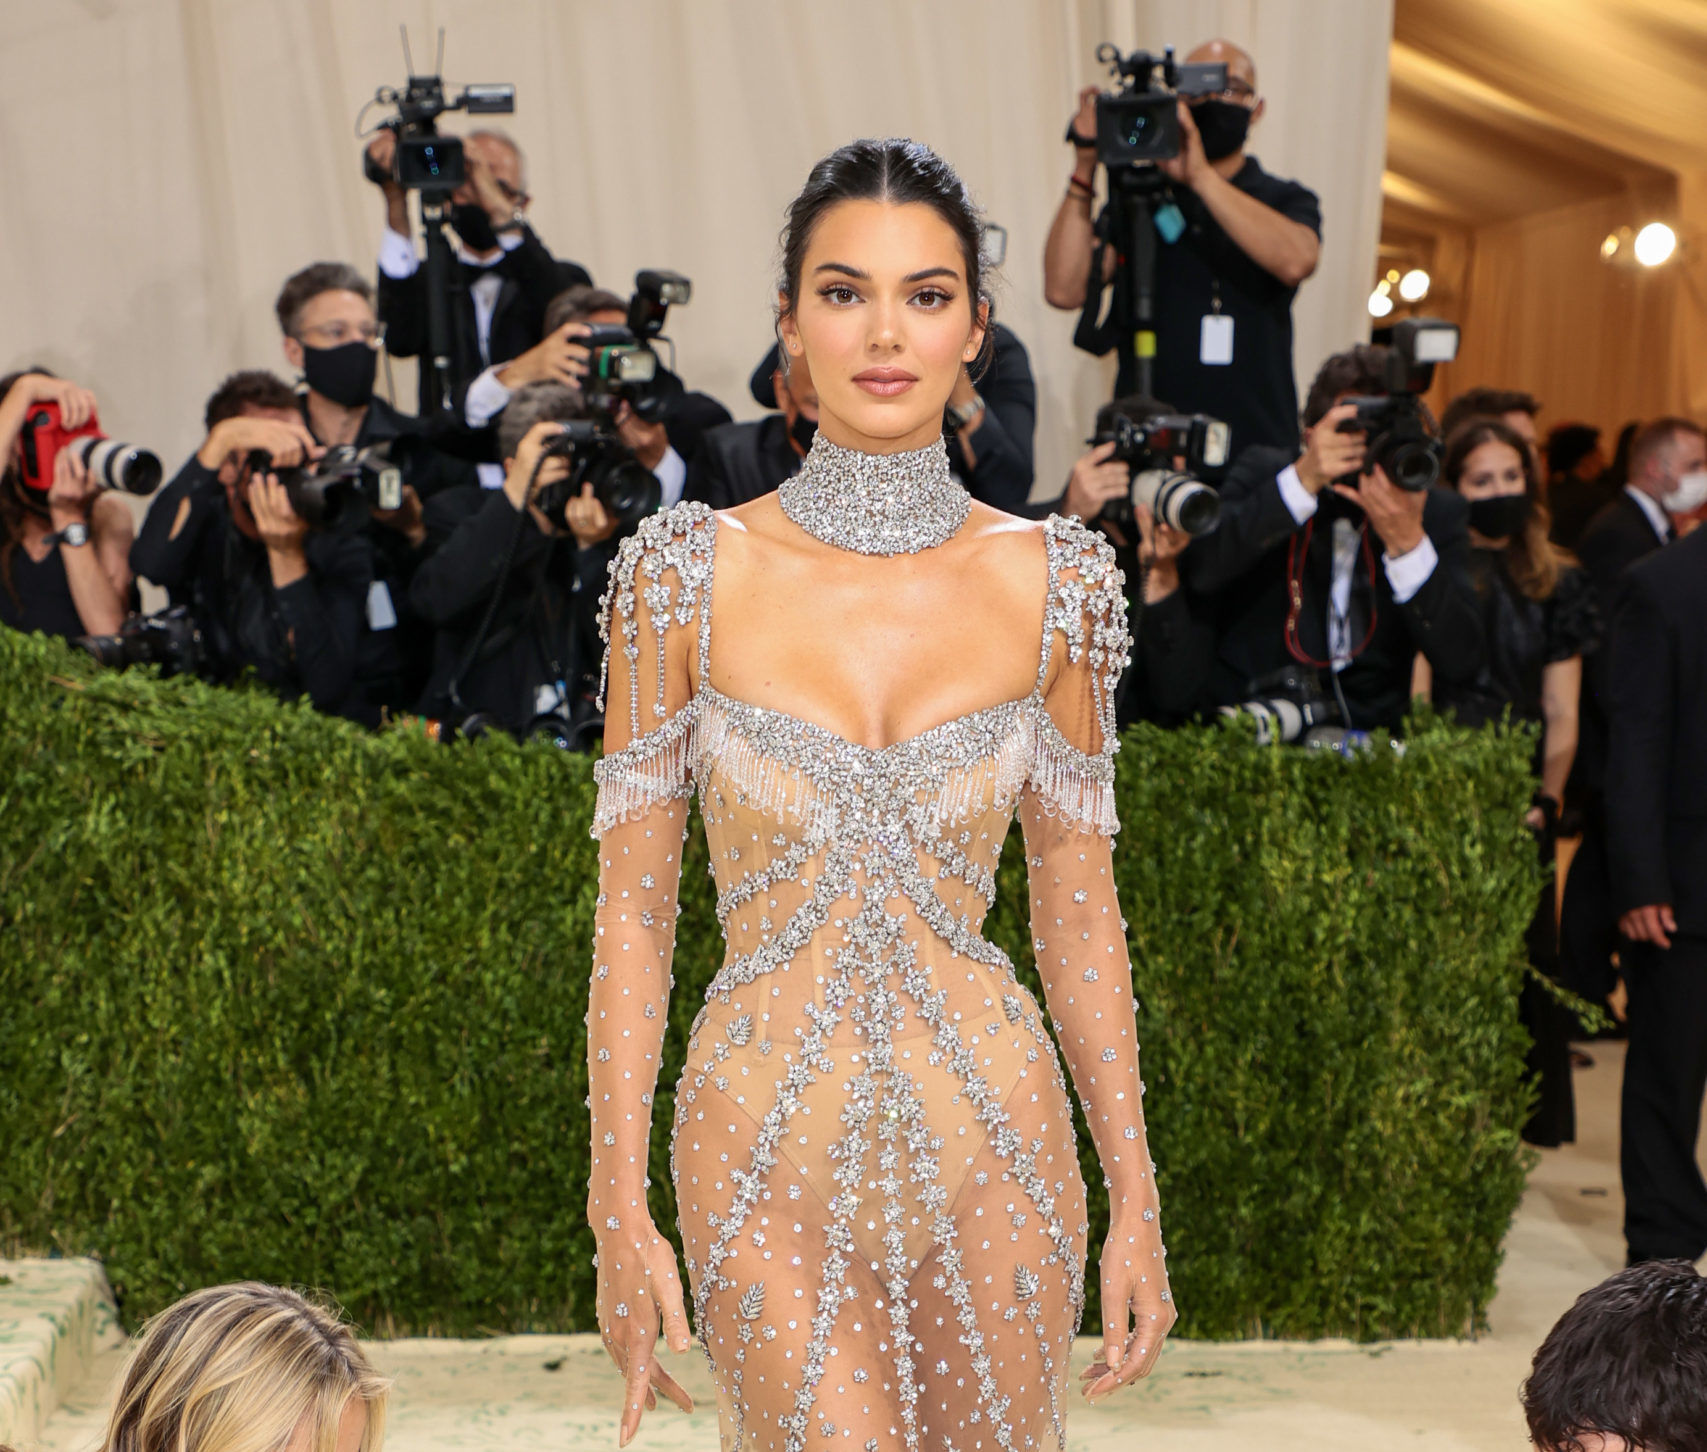 Take cues from these celebrities on how to pull off the sheer dress trend